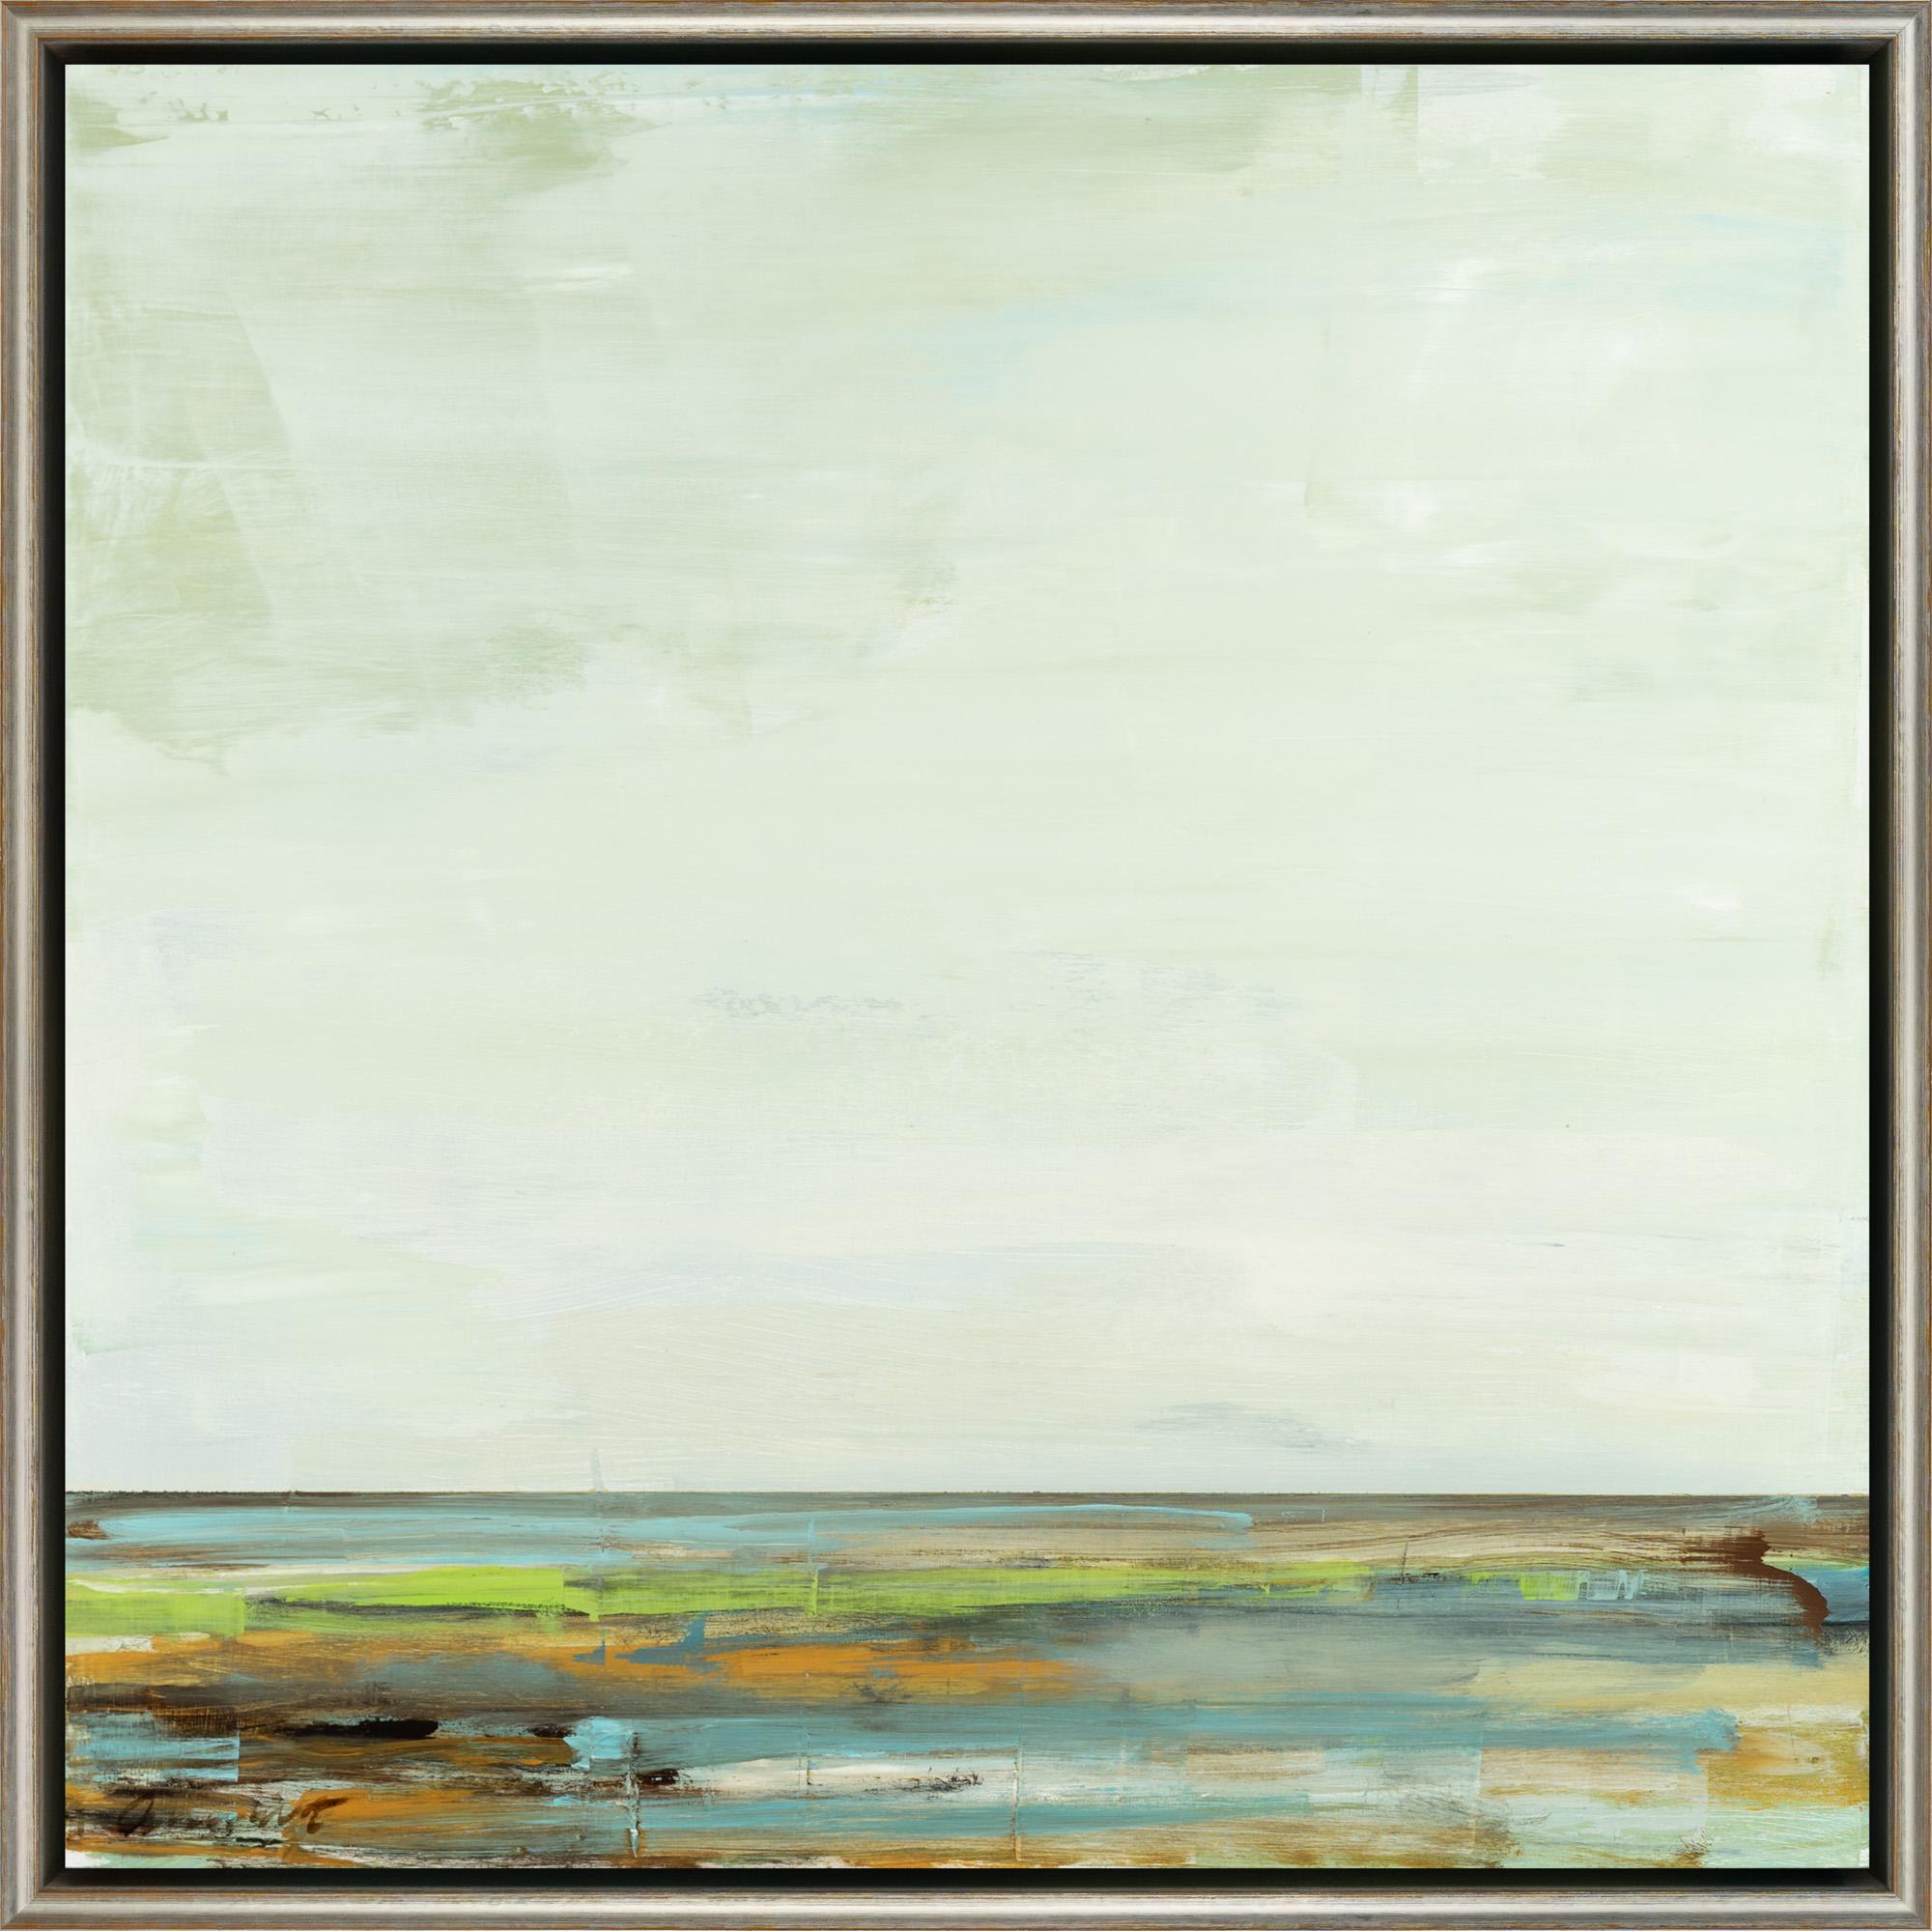 Eric Abrecht Landscape Painting - "Reserved Horizon VIII" Abstract Landscape Waterscape, Oil on Panel Painting